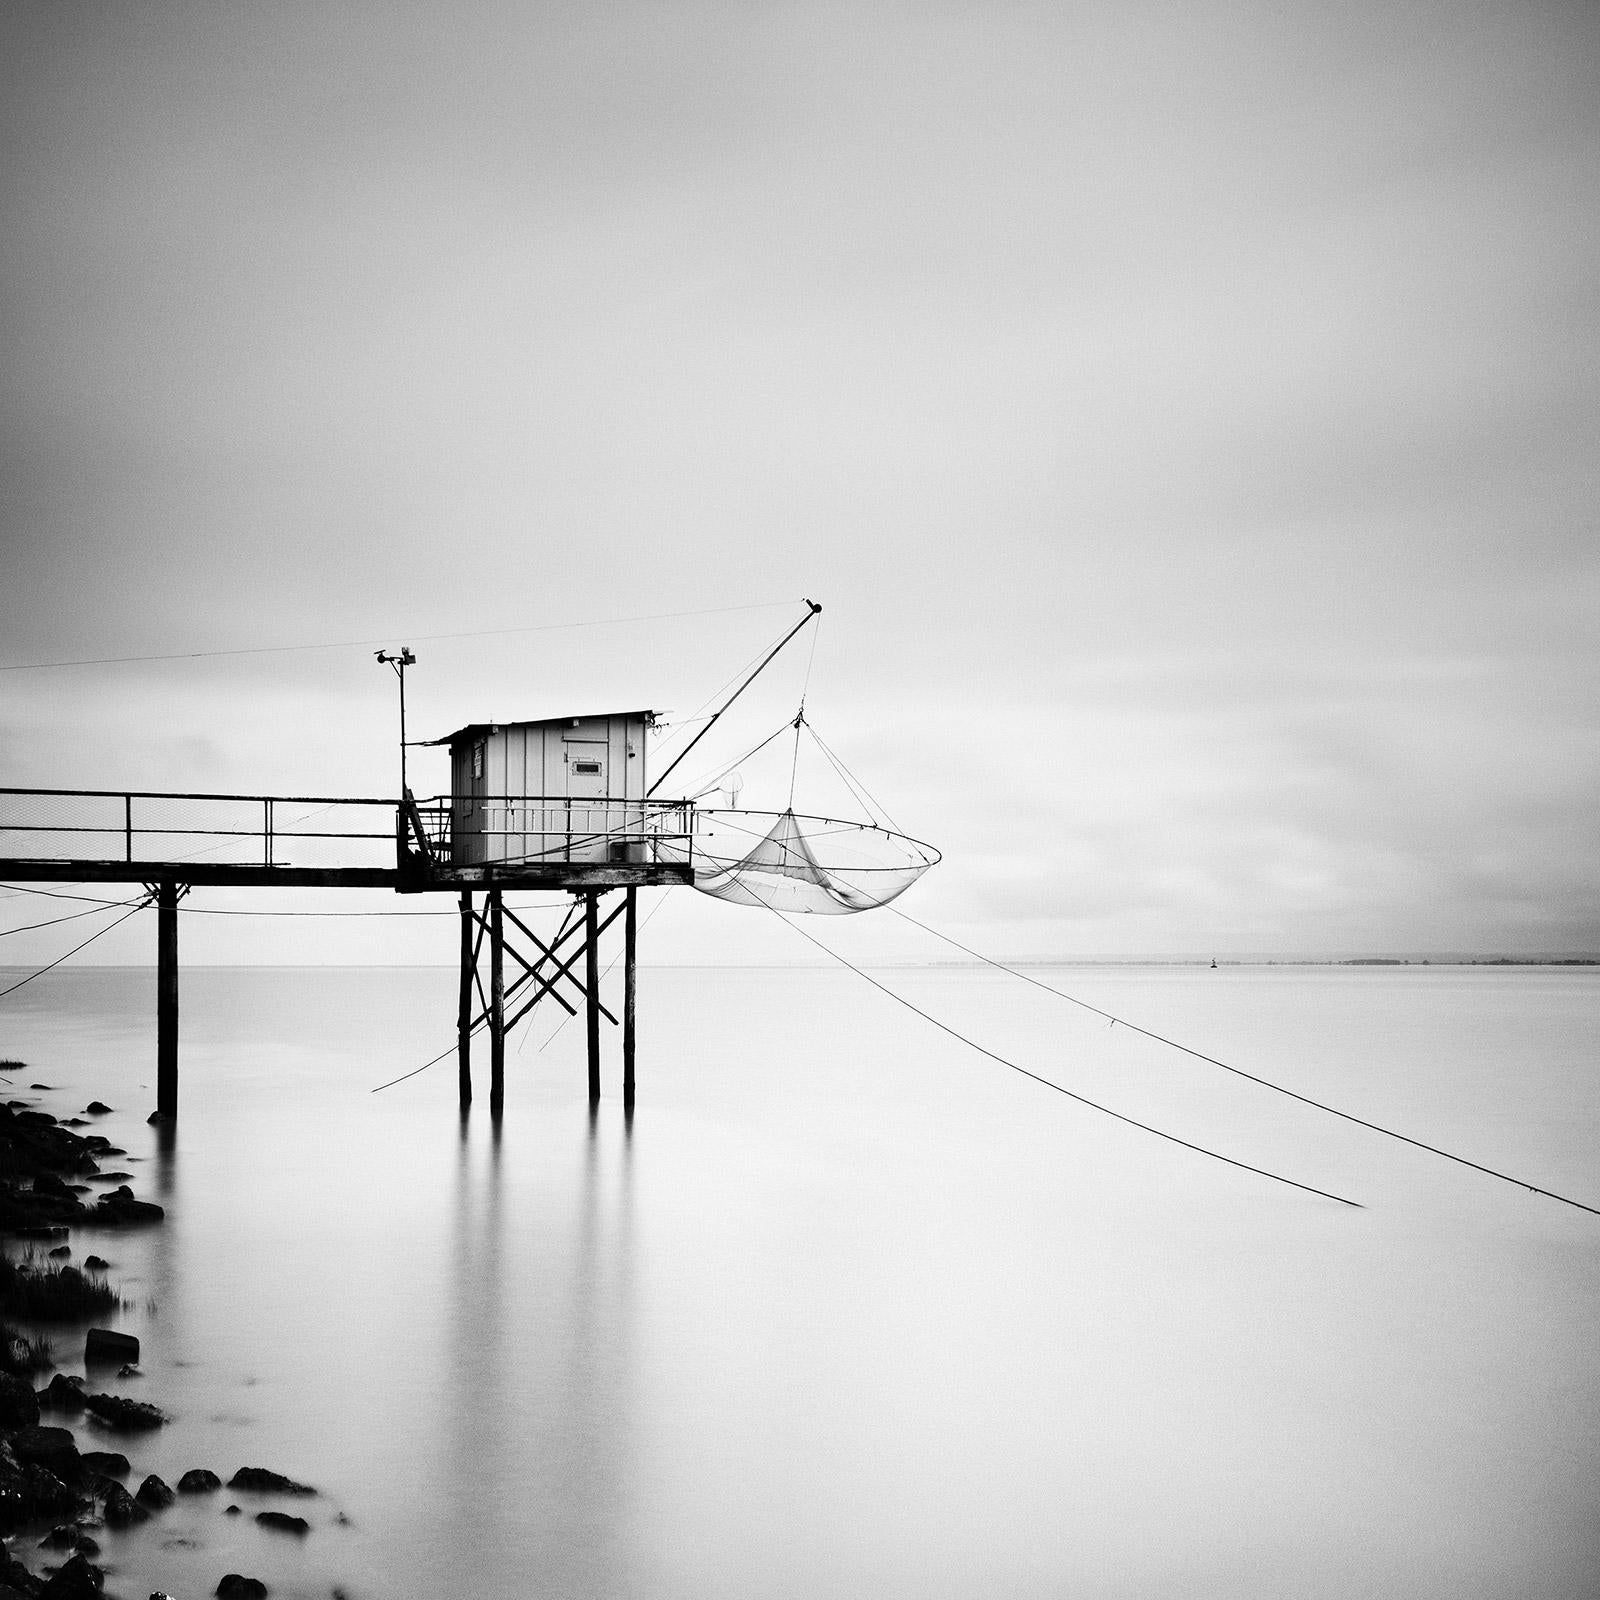 Gerald Berghammer Landscape Photograph - Wooden fishing Hut on Stilts, France, black and white art waterscape photography